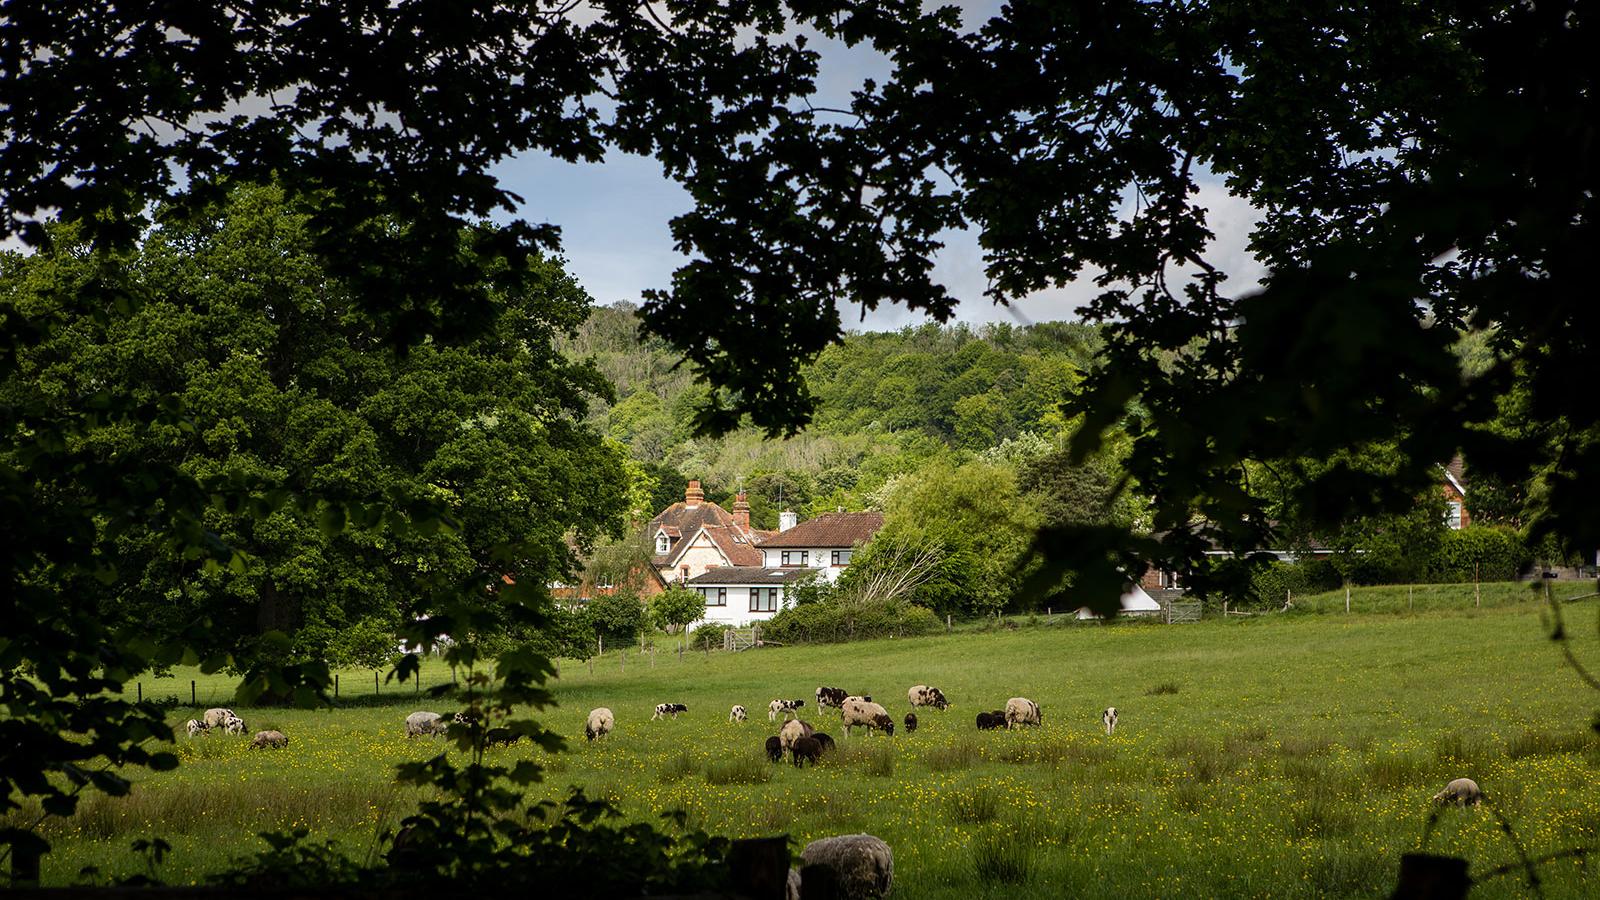 Sheep grazing at Bedales School